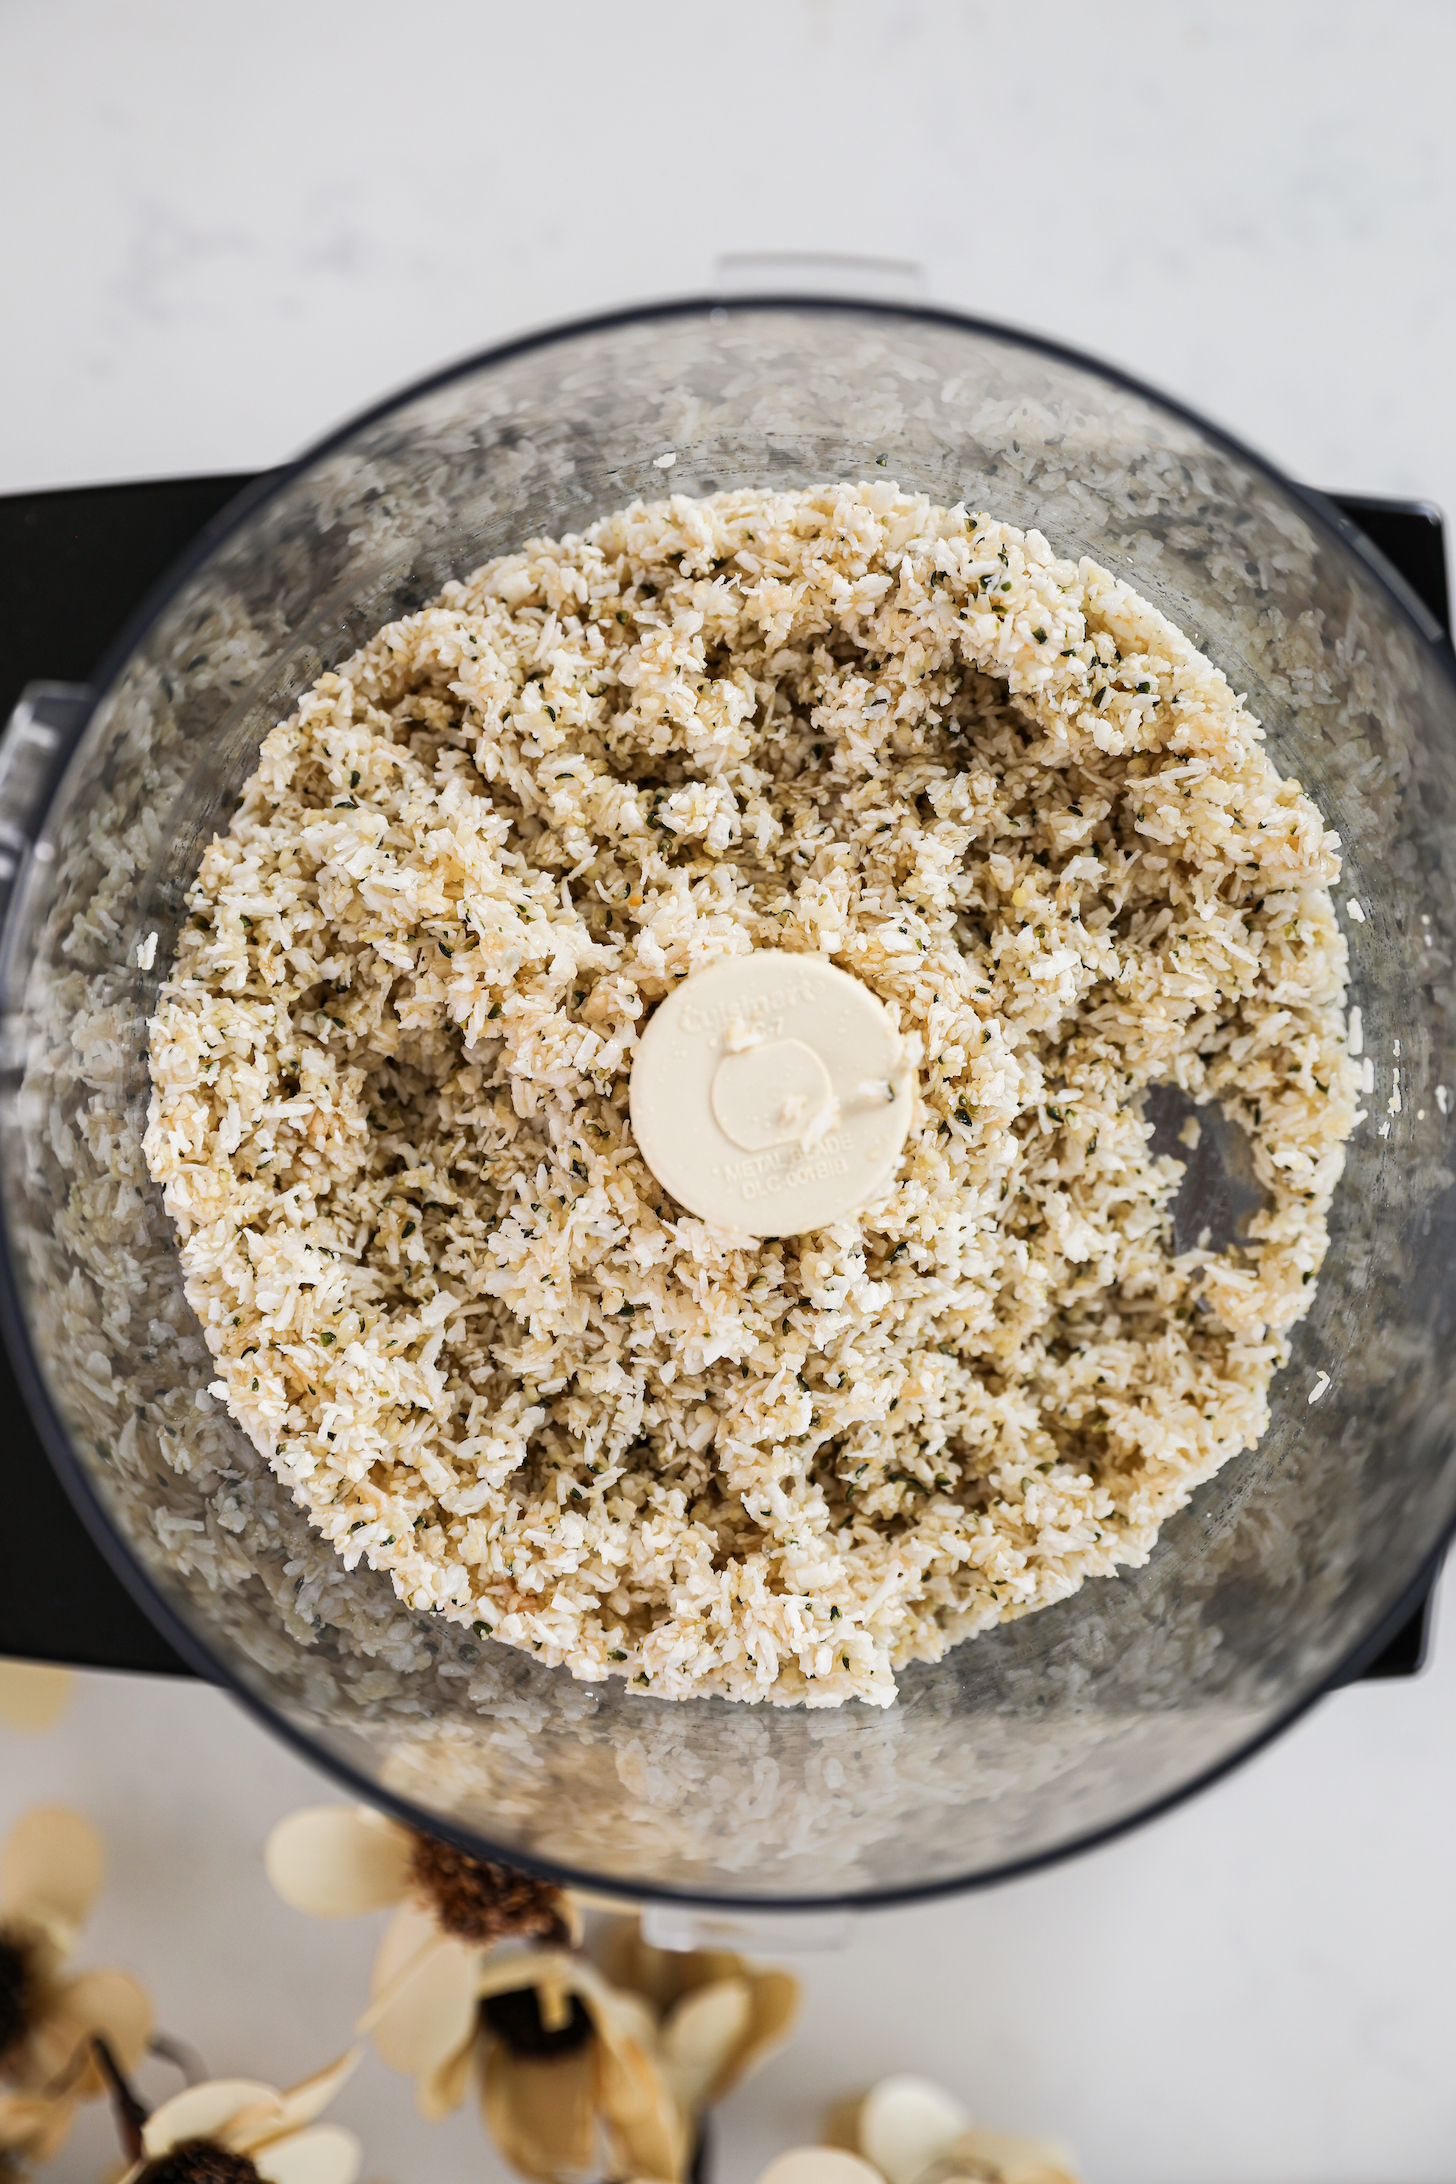 An overhead view of a food processor with a mixture of coconut and hemp seeds.